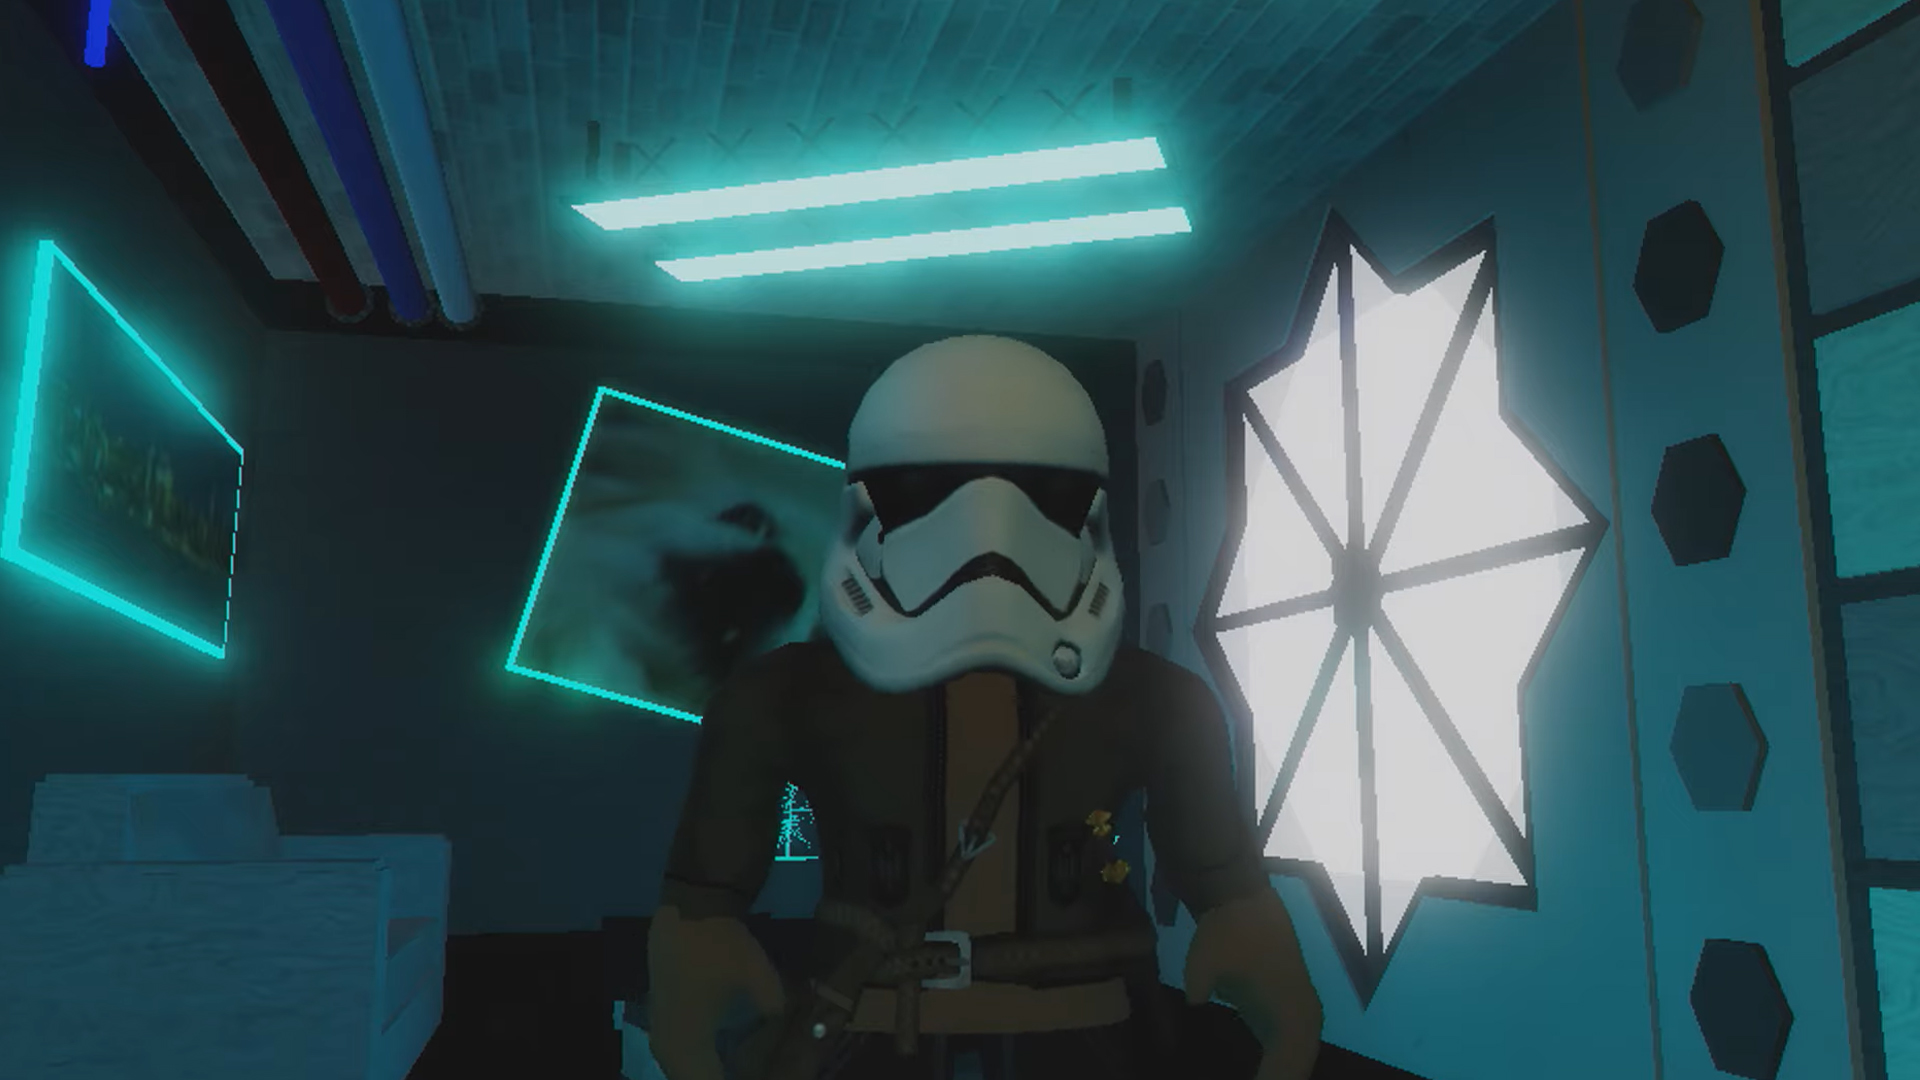 Roblox team up with Star Wars: The Rise of Skywalker for their latest  Creator Challenge